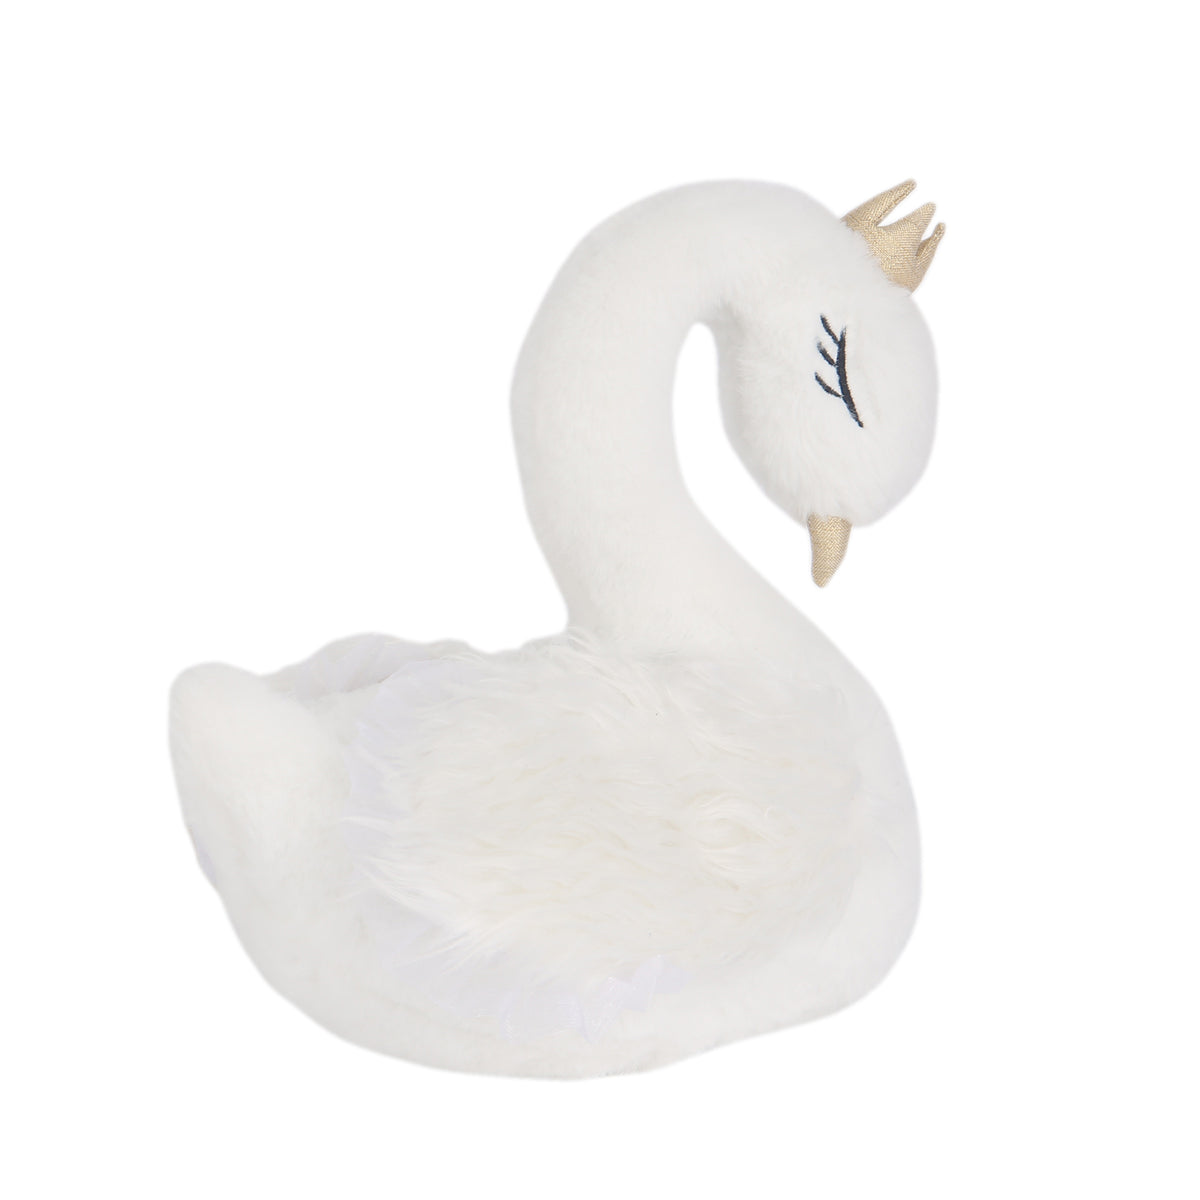 swan teddy with crown